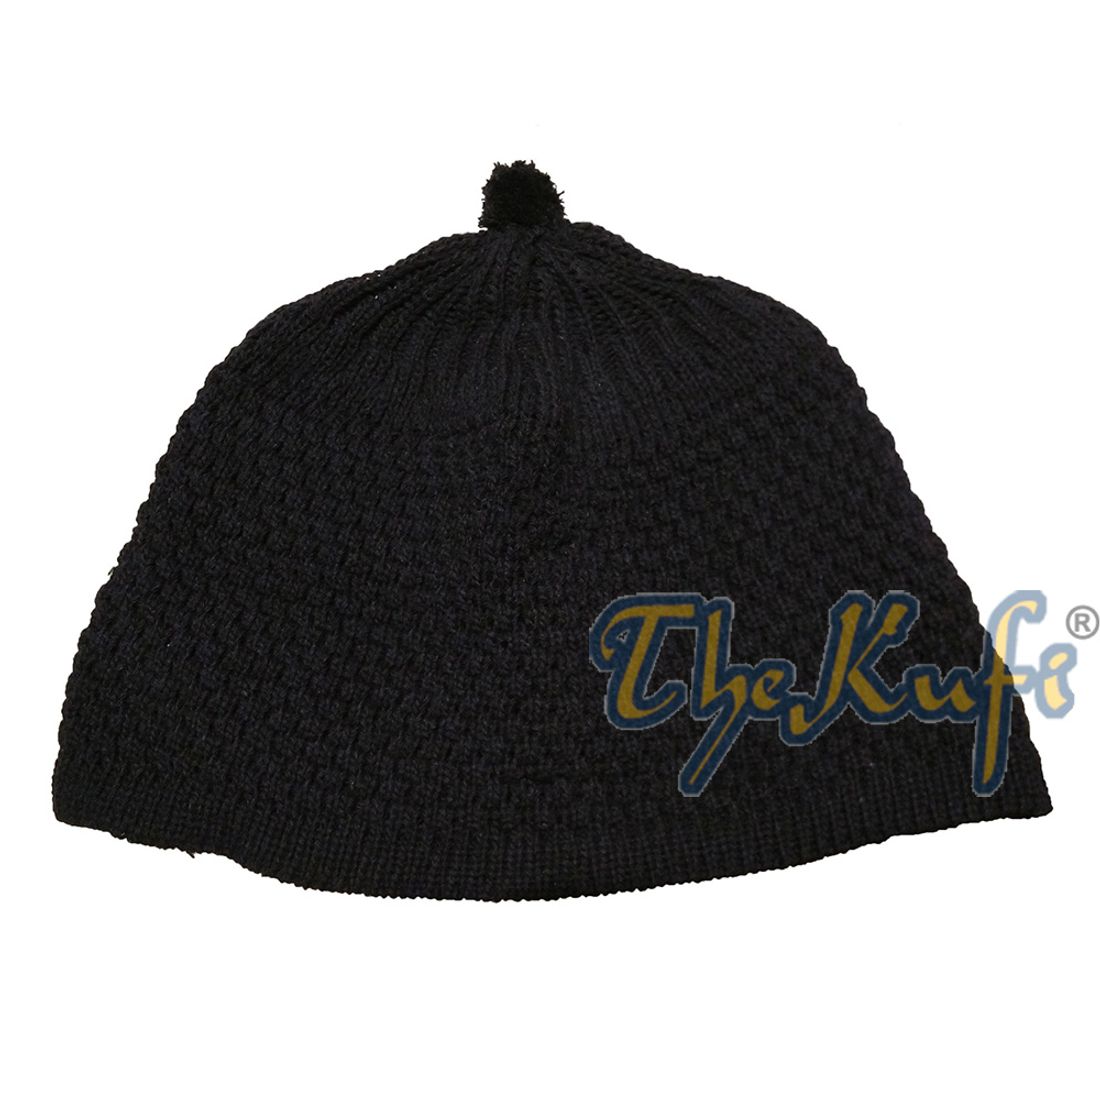 Dark Blue Color Turkish-style Knit Stretchy Beanie Hat One-size